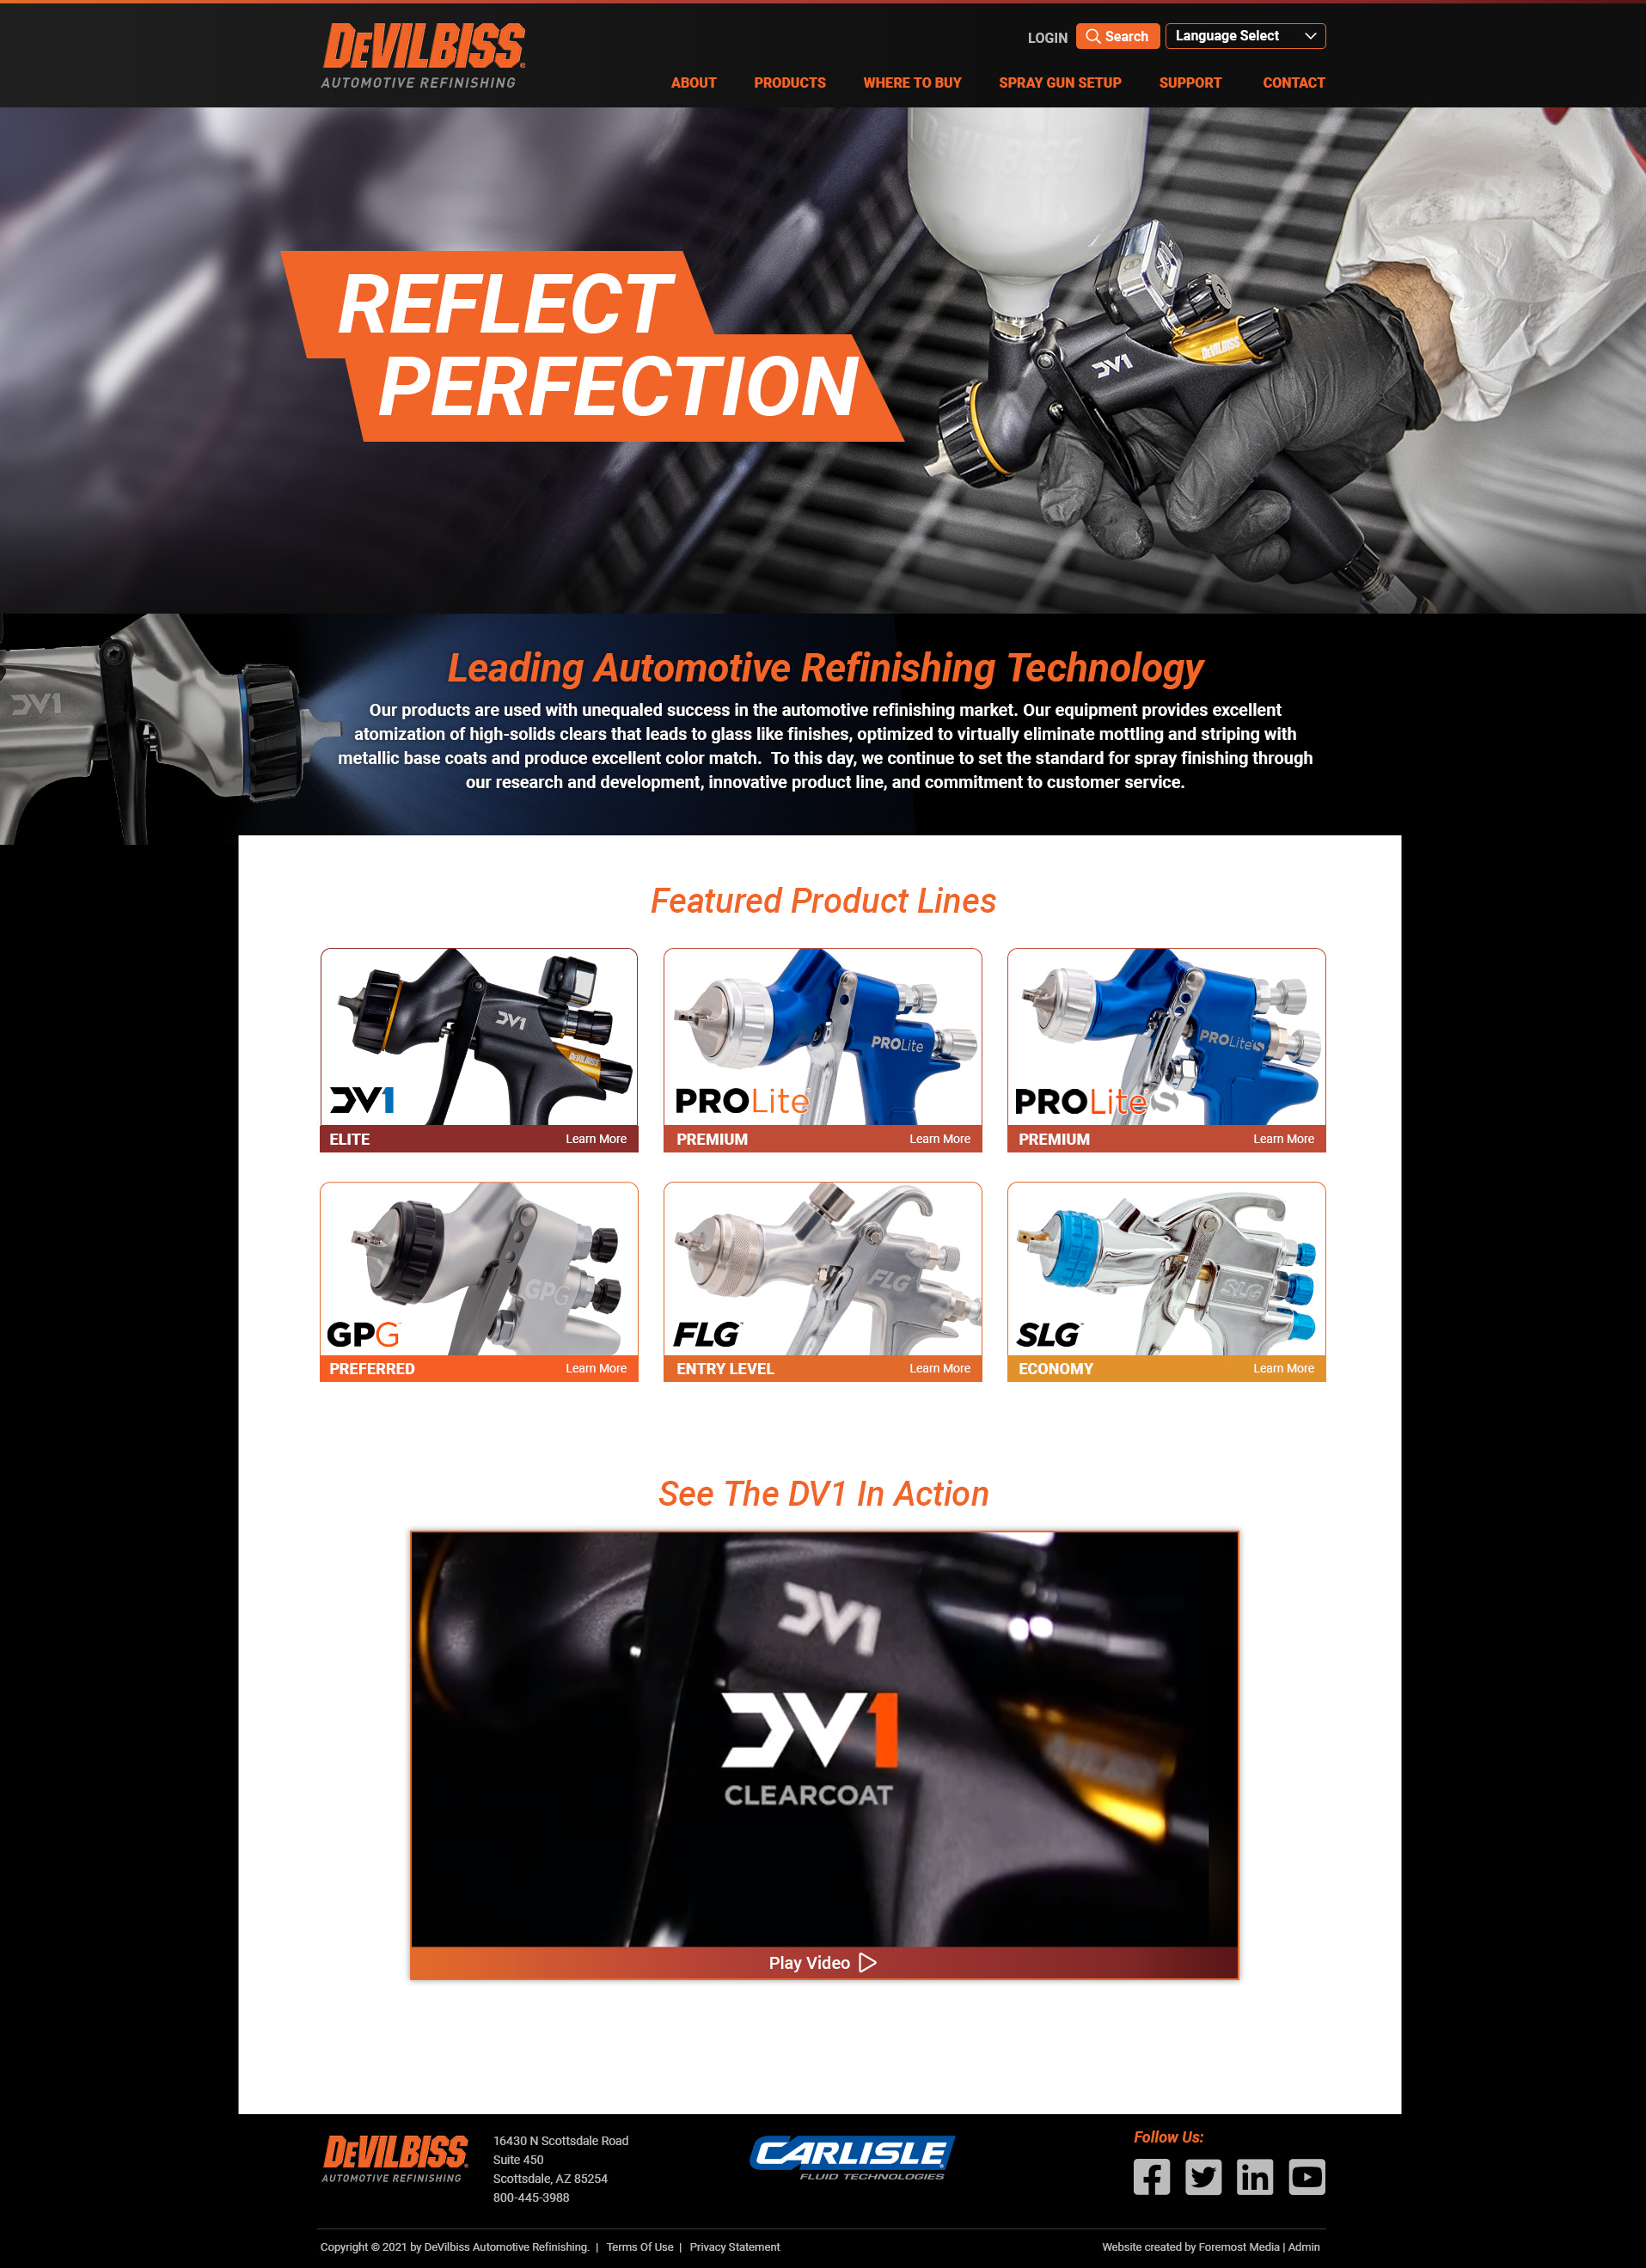 Example of the new and improved DNN website designed by Foremost Media for DevilBiss Automotive Refinishing